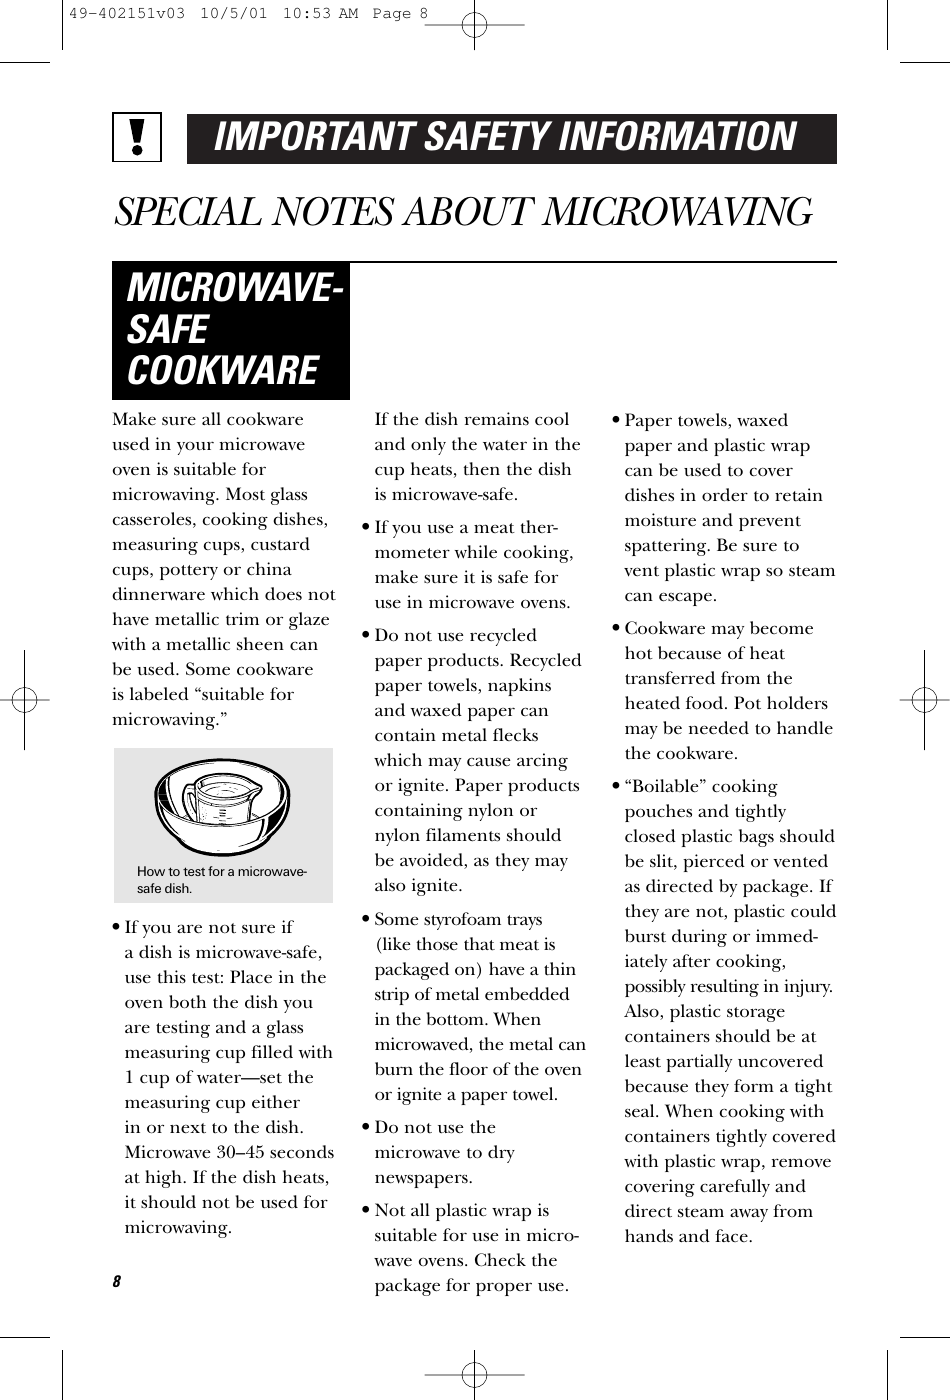 IMPORTANT SAFETY INFORMATIONSPECIAL NOTES ABOUT MICROWAVINGMake sure all cookwareused in your microwaveoven is suitable formicrowaving. Most glasscasseroles, cooking dishes,measuring cups, custardcups, pottery or chinadinnerware which does nothave metallic trim or glazewith a metallic sheen canbe used. Some cookware is labeled “suitable formicrowaving.”•If you are not sure if a dish is microwave-safe,use this test: Place in theoven both the dish youare testing and a glassmeasuring cup filled with1 cup of water—set themeasuring cup either in or next to the dish.Microwave 30–45 secondsat high. If the dish heats,it should not be used formicrowaving. If the dish remains cooland only the water in thecup heats, then the dishis microwave-safe.•If you use a meat ther-mometer while cooking,make sure it is safe foruse in microwave ovens.•Do not use recycledpaper products. Recycledpaper towels, napkinsand waxed paper cancontain metal fleckswhich may cause arcingor ignite. Paper productscontaining nylon ornylon filaments shouldbe avoided, as they mayalso ignite. •Some styrofoam trays (like those that meat ispackaged on) have a thinstrip of metal embeddedin the bottom. Whenmicrowaved, the metal canburn the floor of the ovenor ignite a paper towel.•Do not use themicrowave to drynewspapers.•Not all plastic wrap issuitable for use in micro-wave ovens. Check thepackage for proper use.•Paper towels, waxedpaper and plastic wrapcan be used to coverdishes in order to retainmoisture and preventspattering. Be sure tovent plastic wrap so steamcan escape.•Cookware may becomehot because of heattransferred from theheated food. Pot holdersmay be needed to handlethe cookware.•“Boilable” cookingpouches and tightlyclosed plastic bags shouldbe slit, pierced or ventedas directed by package. Ifthey are not, plastic couldburst during or immed-iately after cooking,possibly resulting in injury.Also, plastic storagecontainers should be atleast partially uncoveredbecause they form a tightseal. When cooking withcontainers tightly coveredwith plastic wrap, removecovering carefully anddirect steam away fromhands and face.MICROWAVE-SAFECOOKWARE8How to test for a microwave-safe dish.49-402151v03  10/5/01  10:53 AM  Page 8